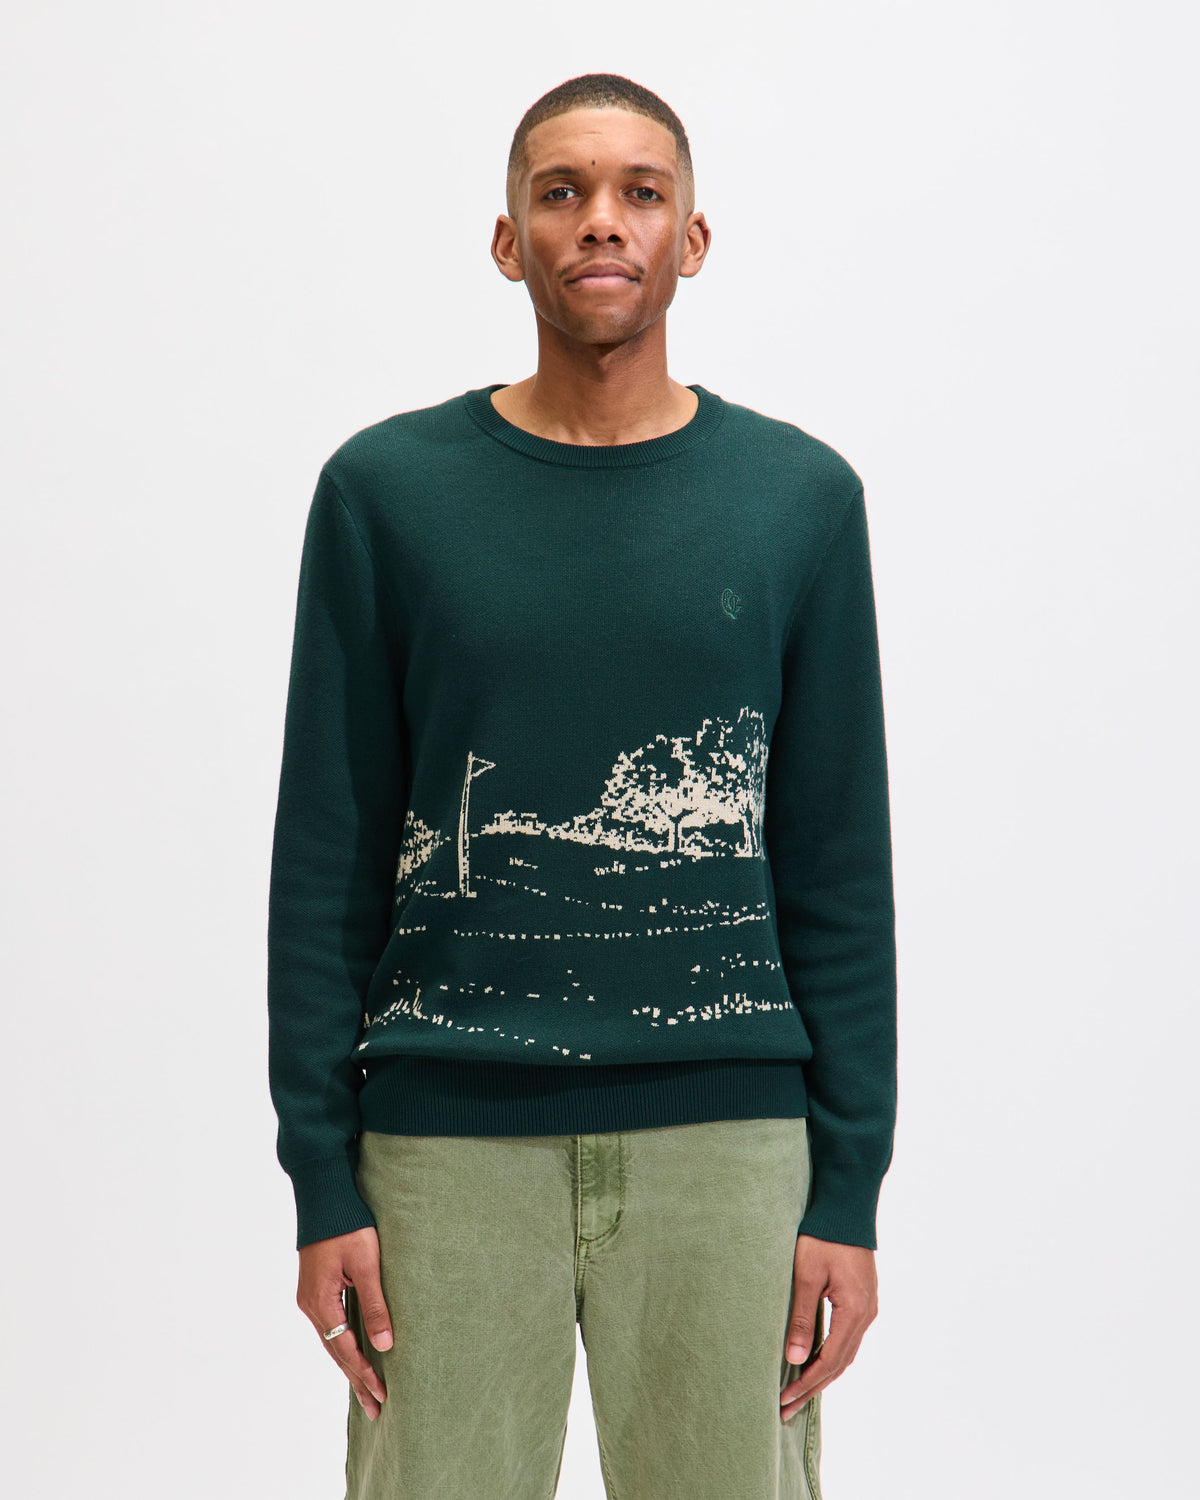 Quiet Greens Knit Sweater in Forest